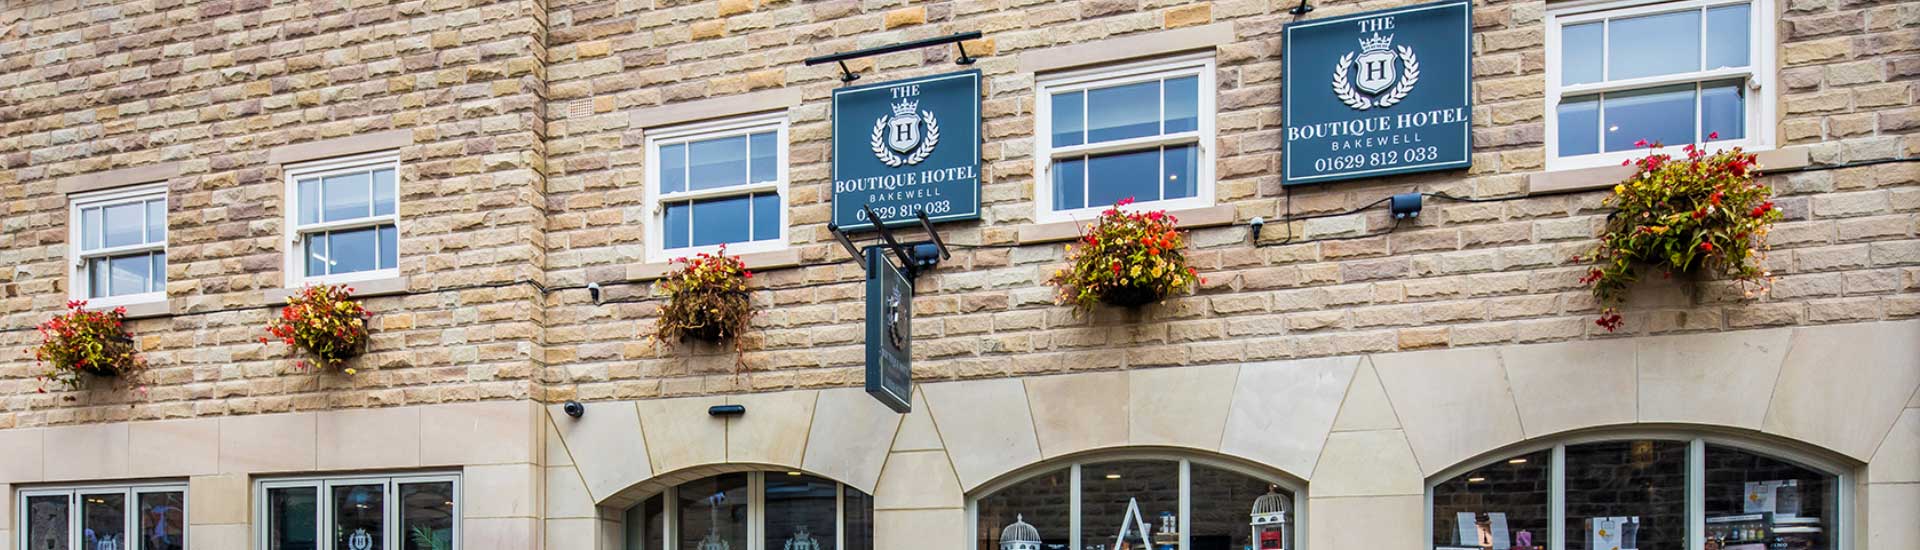 Luxury Bakewell Hotels | The H Boutique Hotel, Bakewell